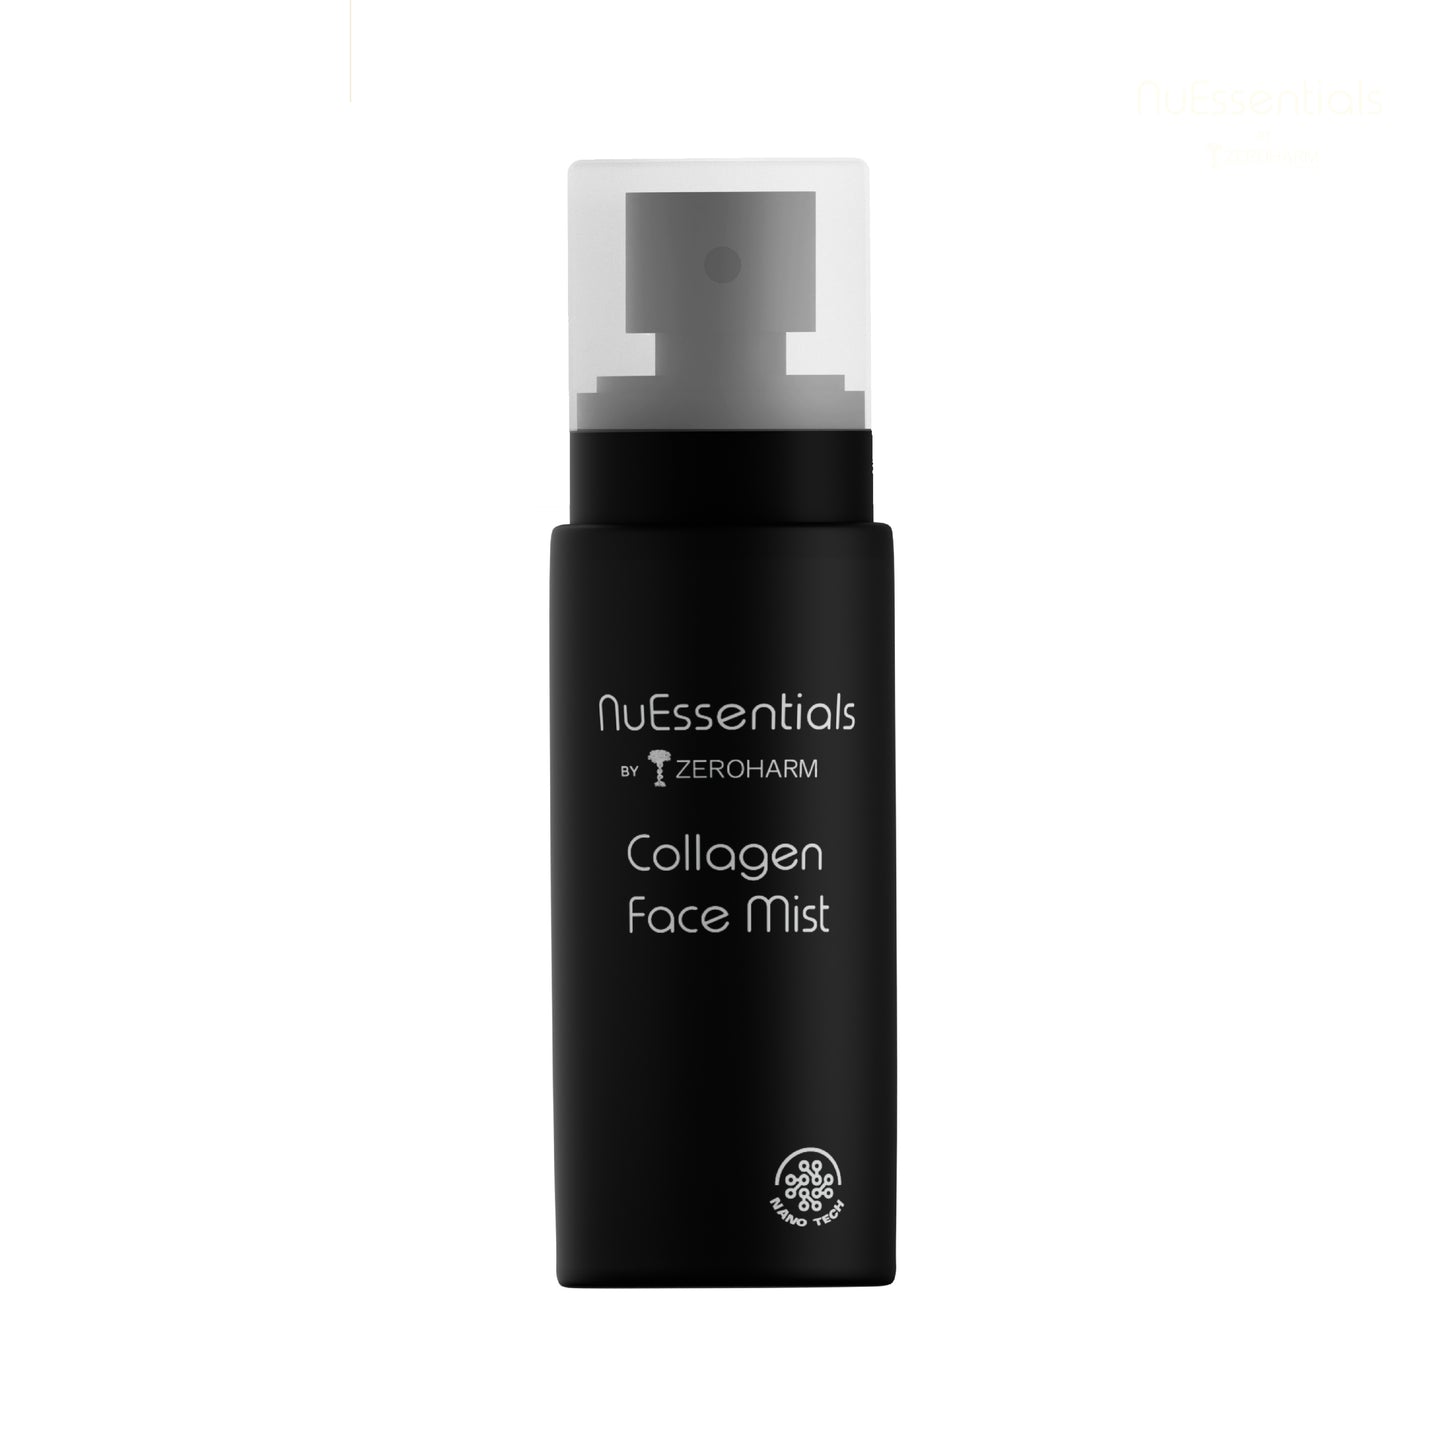 NuEssentials Face Mist